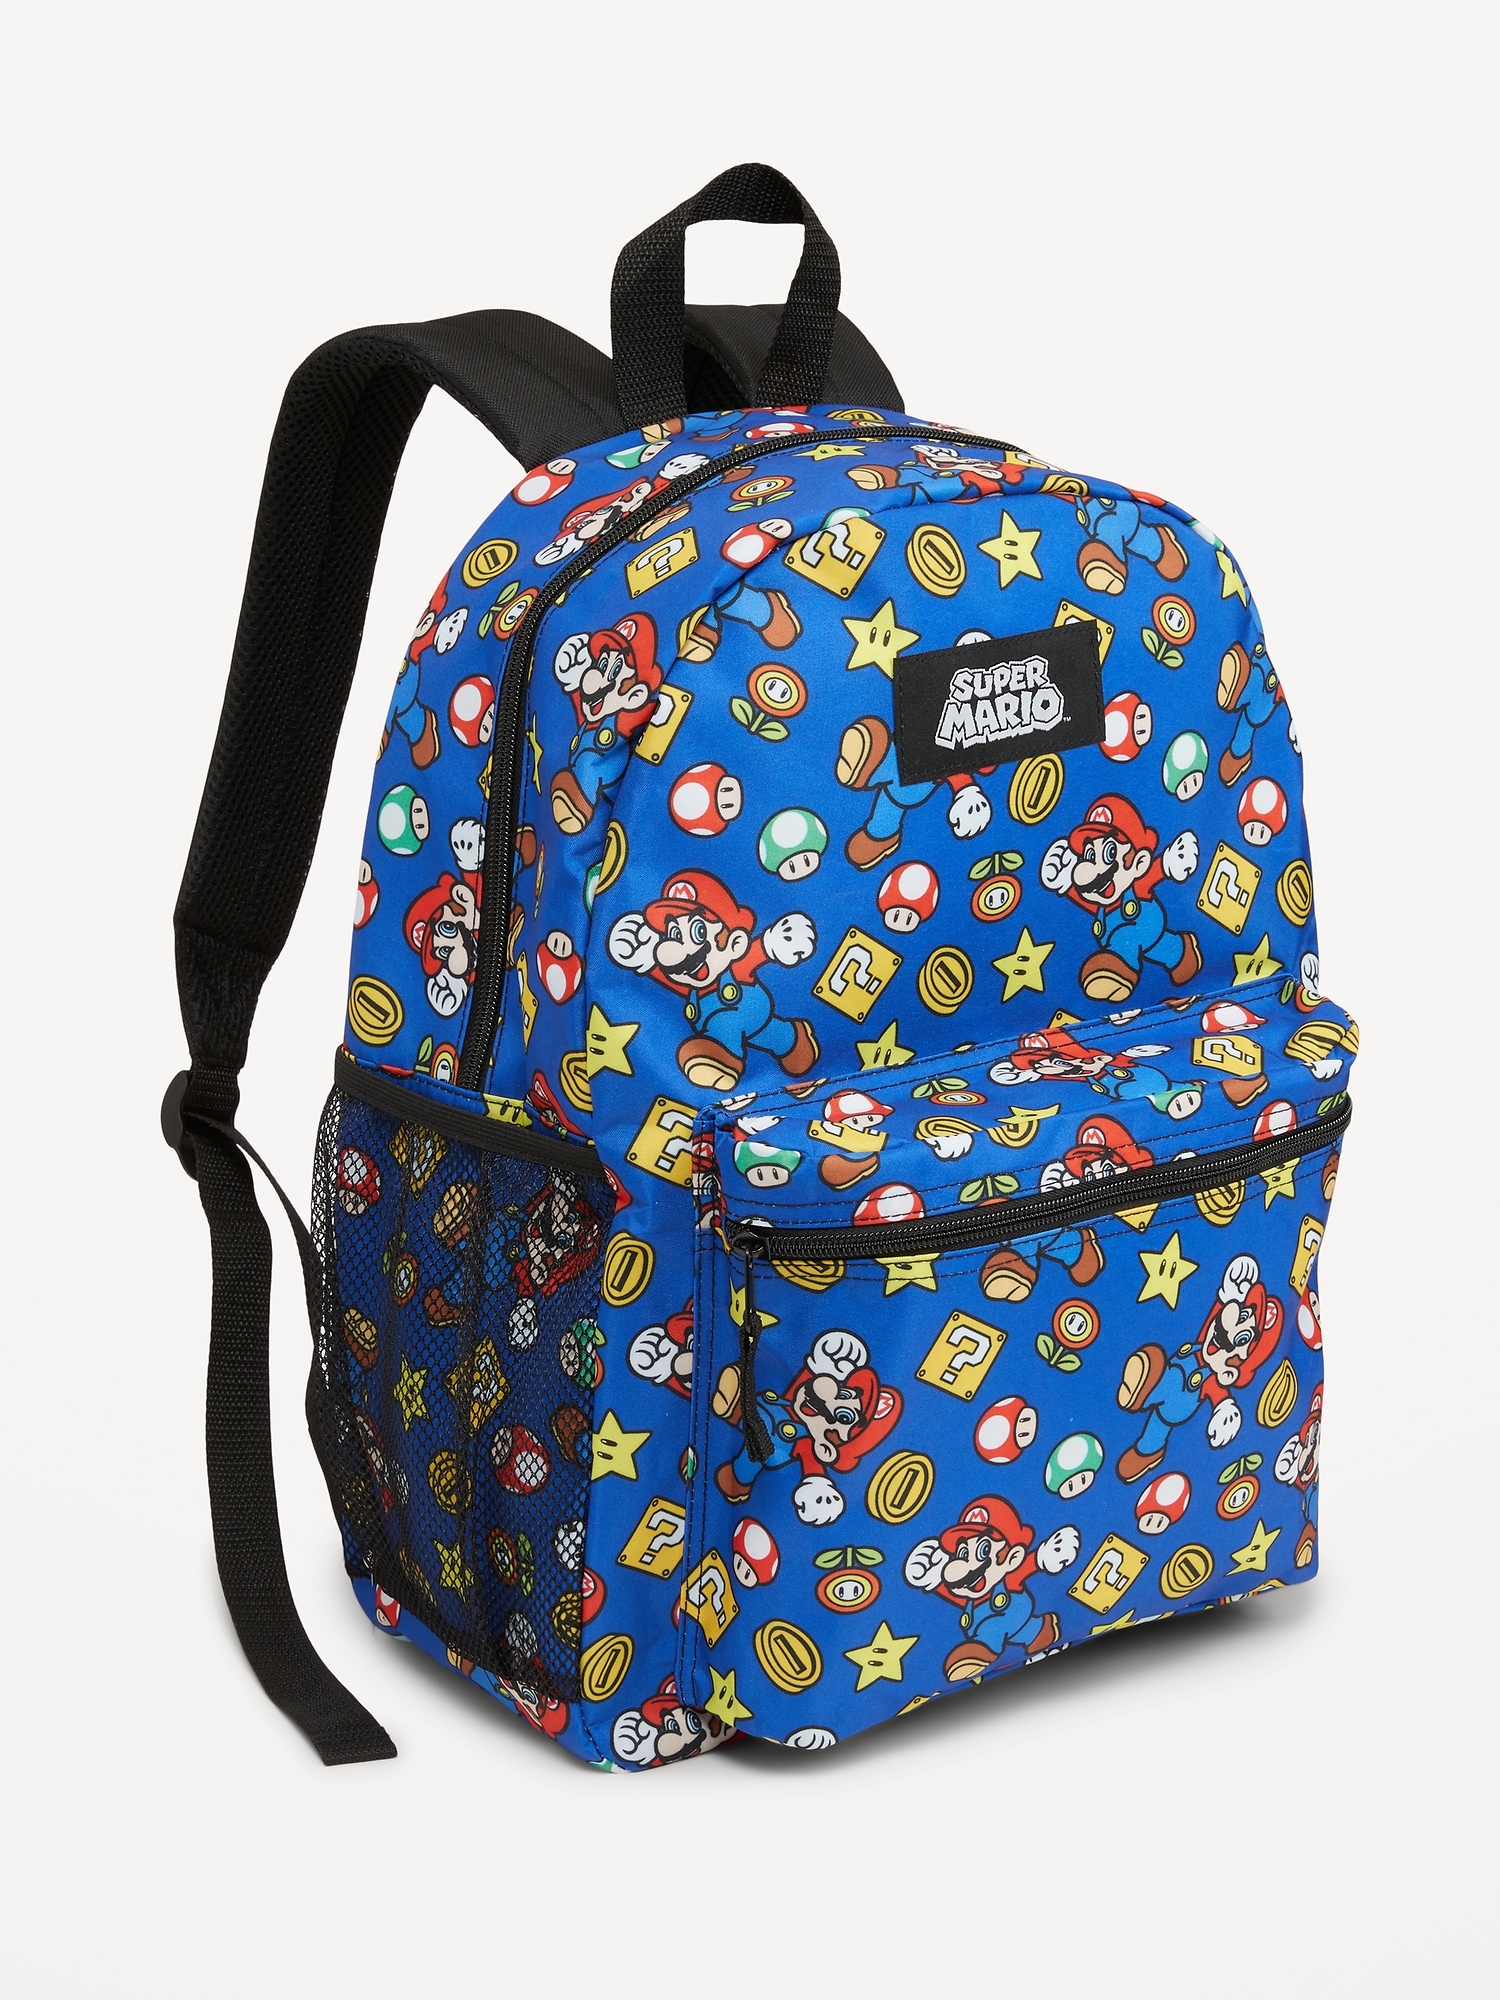 Super Mario™ Canvas Backpack for Kids